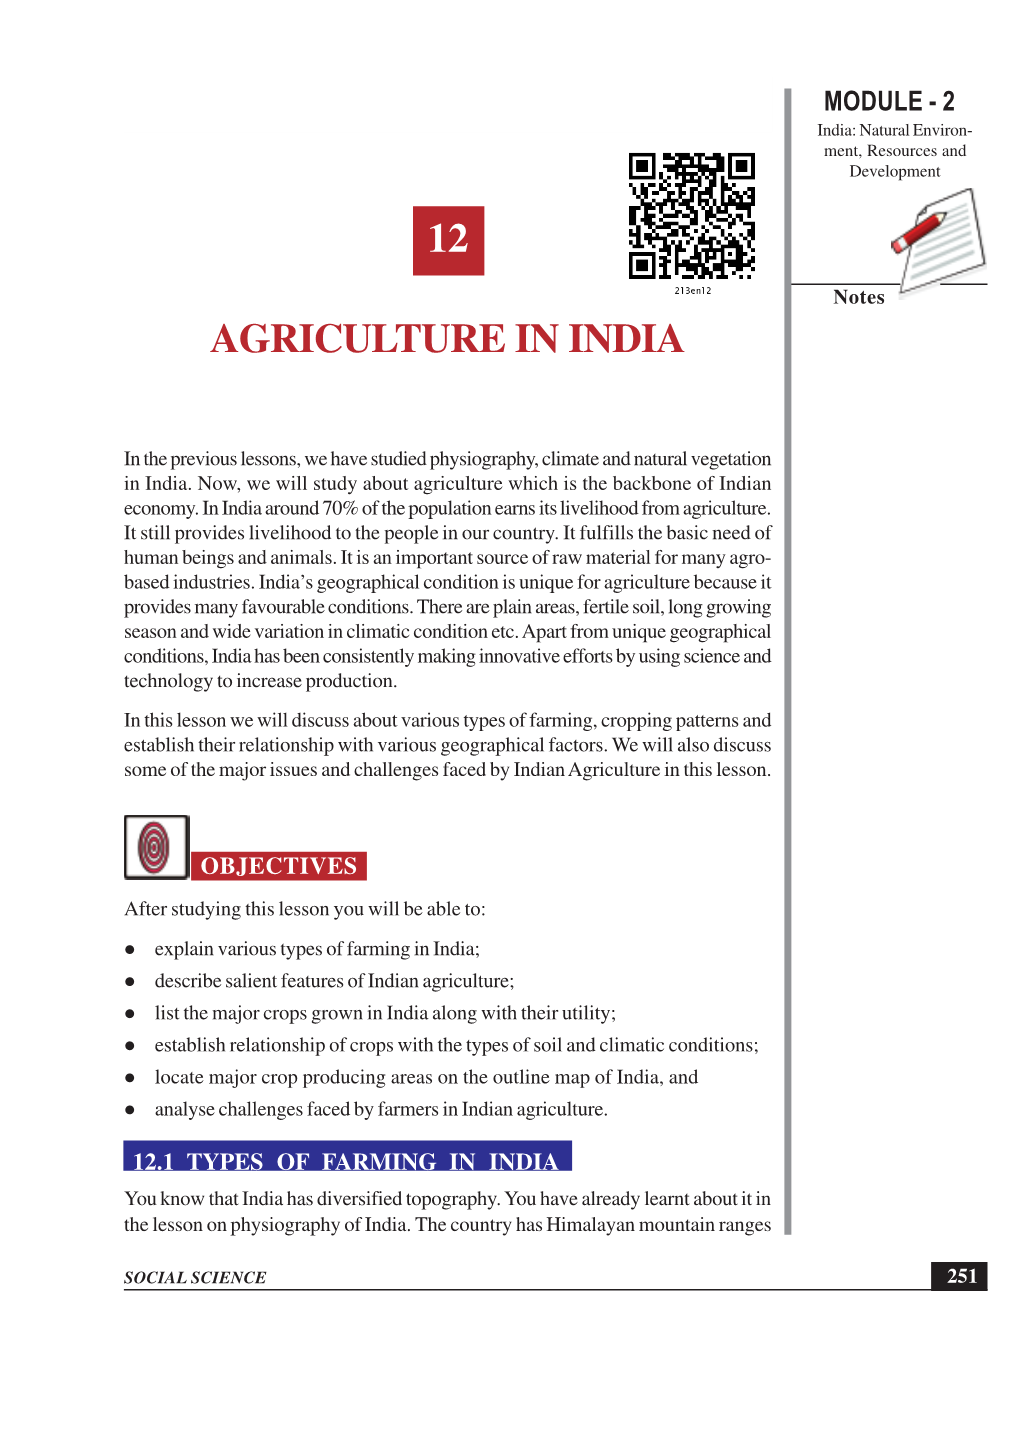 12 Agriculture in India